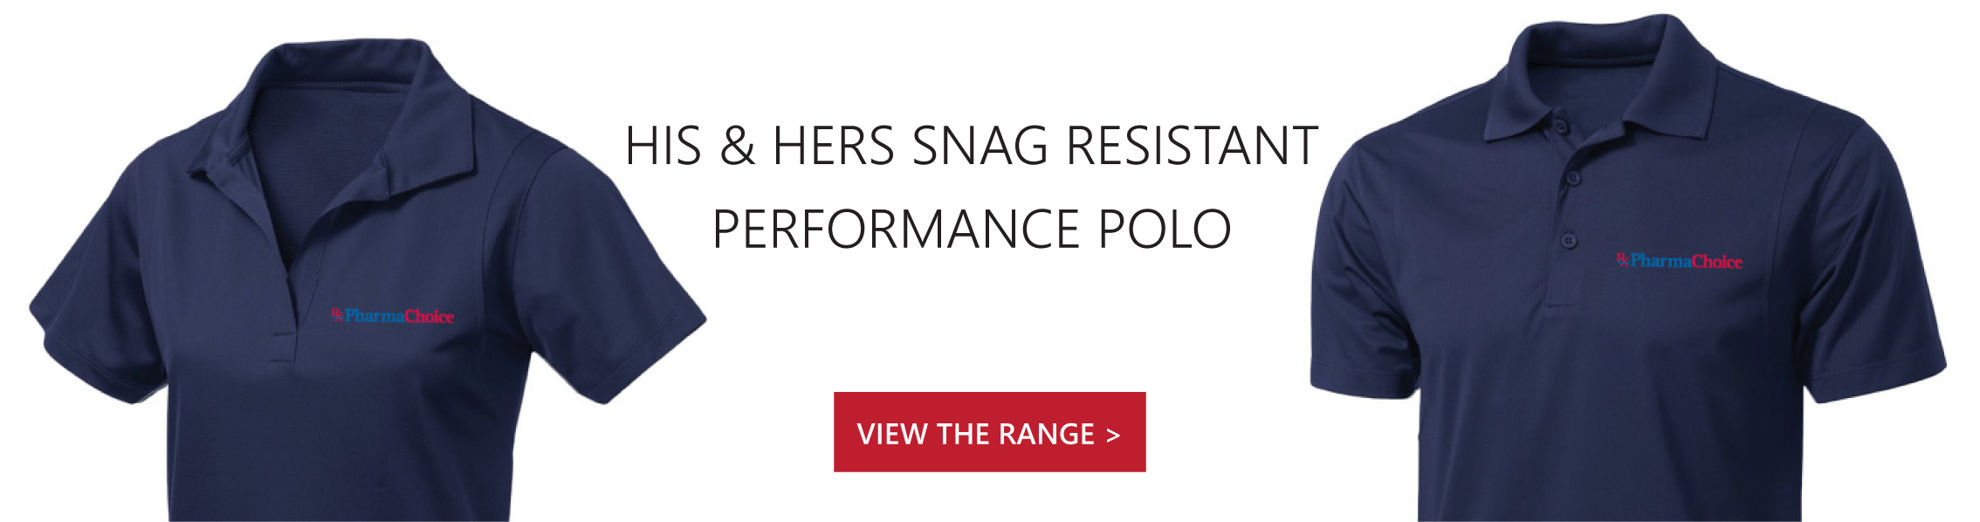 HIS & HERS SNAG RESISTANT PERFORMANCE POLO